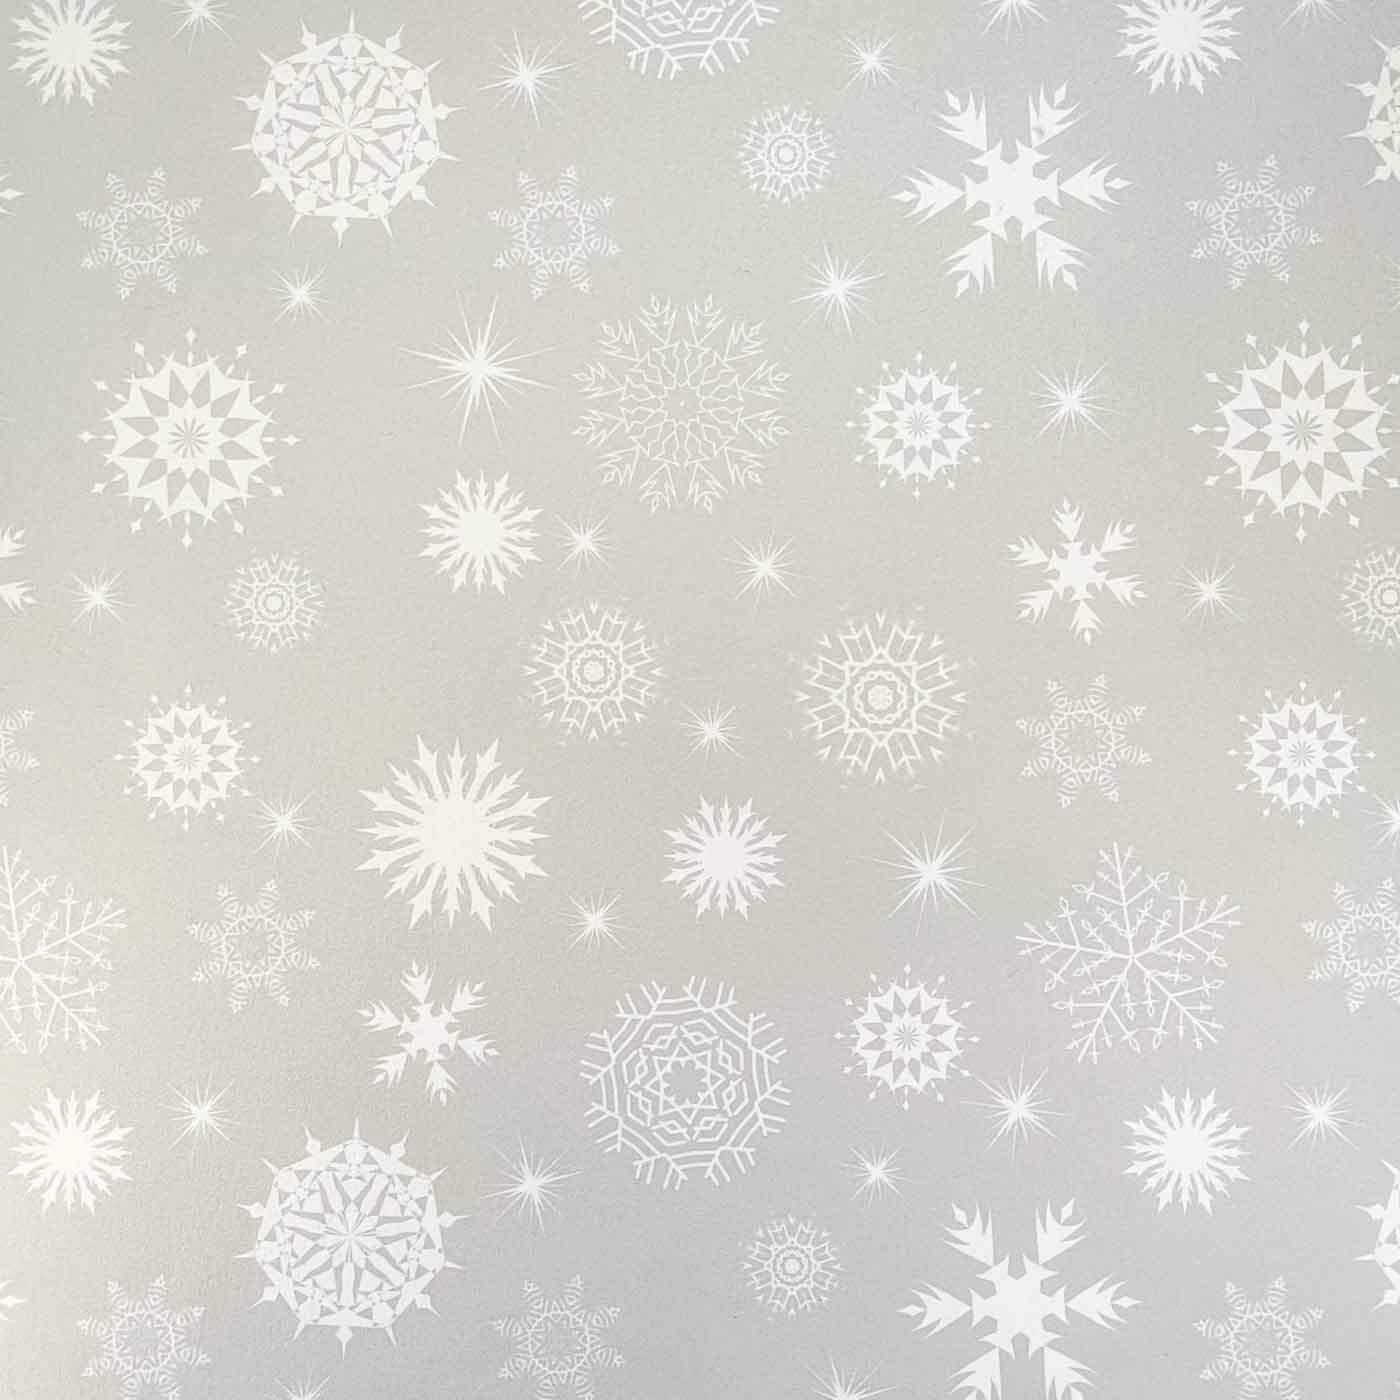 ice-maiden-silver-snowflake-print-a4-craft-paper